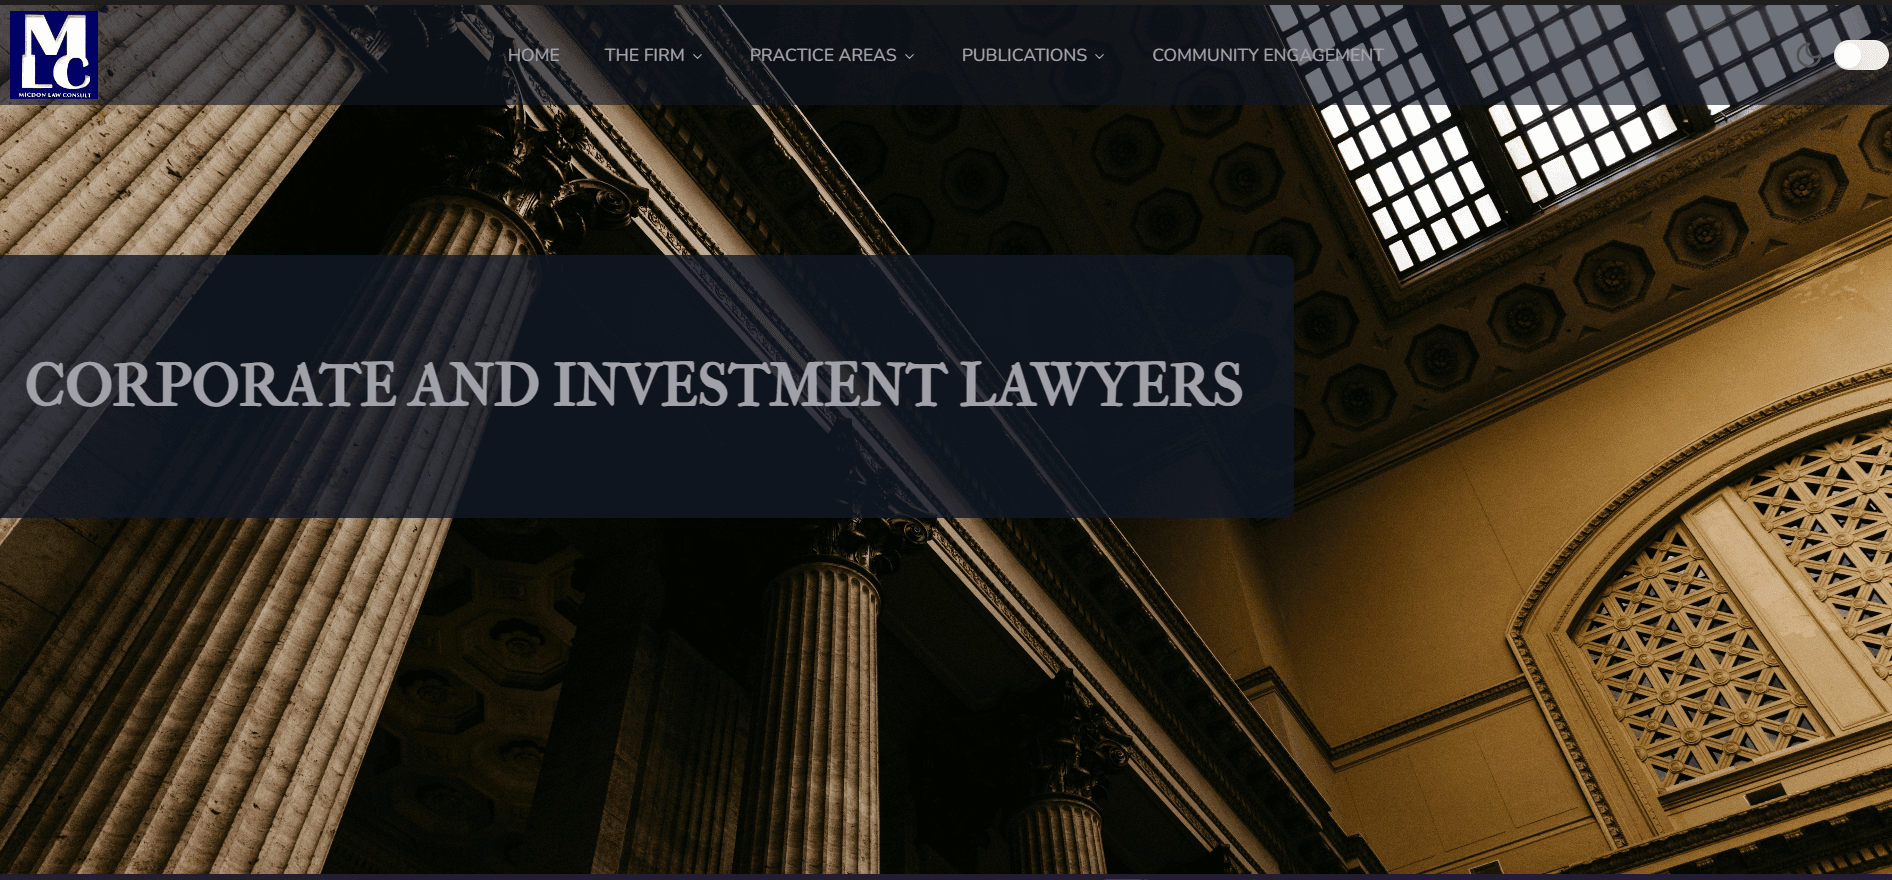 A Law Firm Website